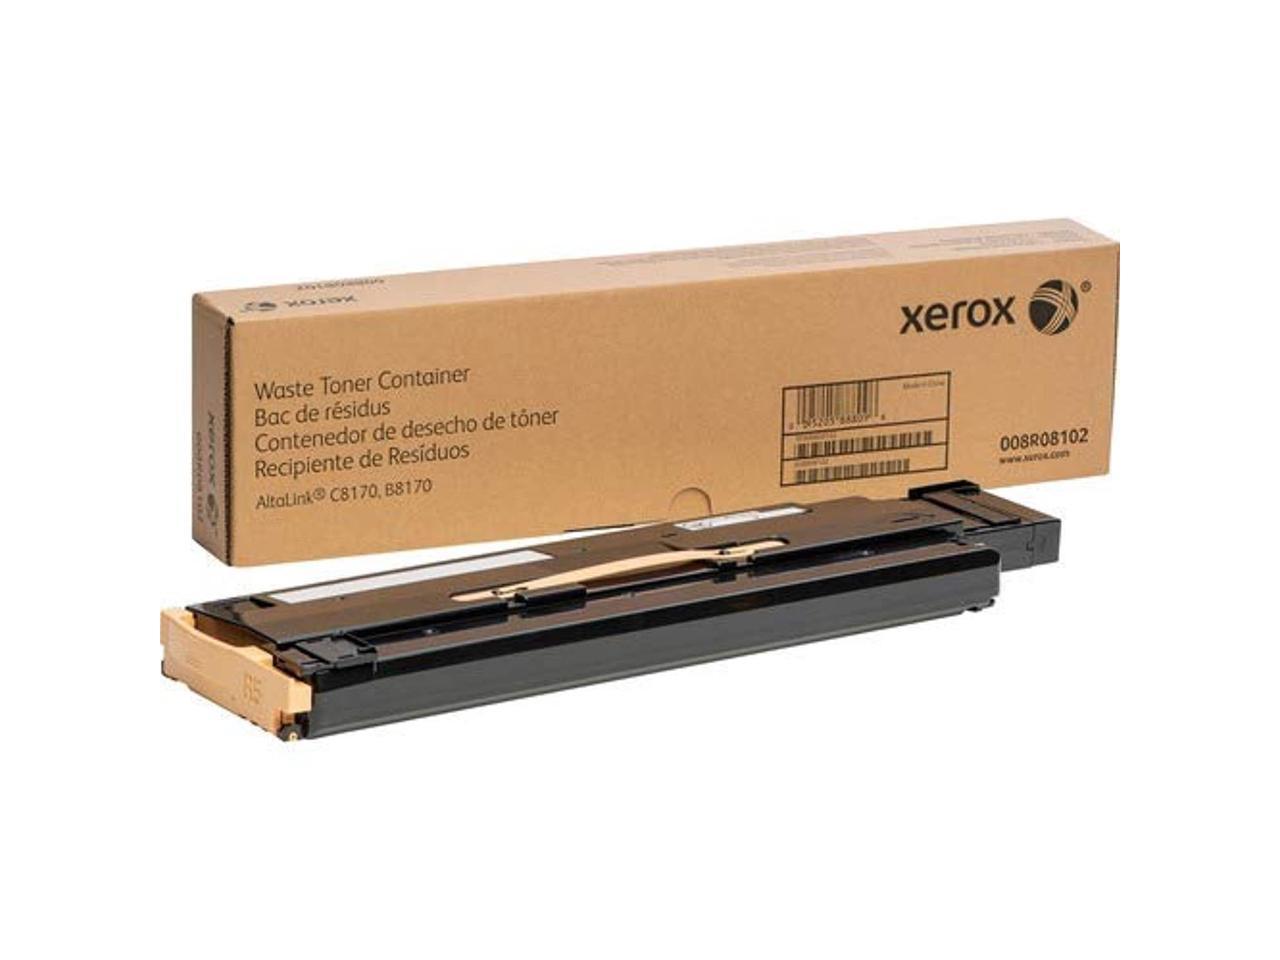 Xerox AltaLink C8170, B8170 Waste Toner Container with Suction Filter 008R08102 - image 4 of 5